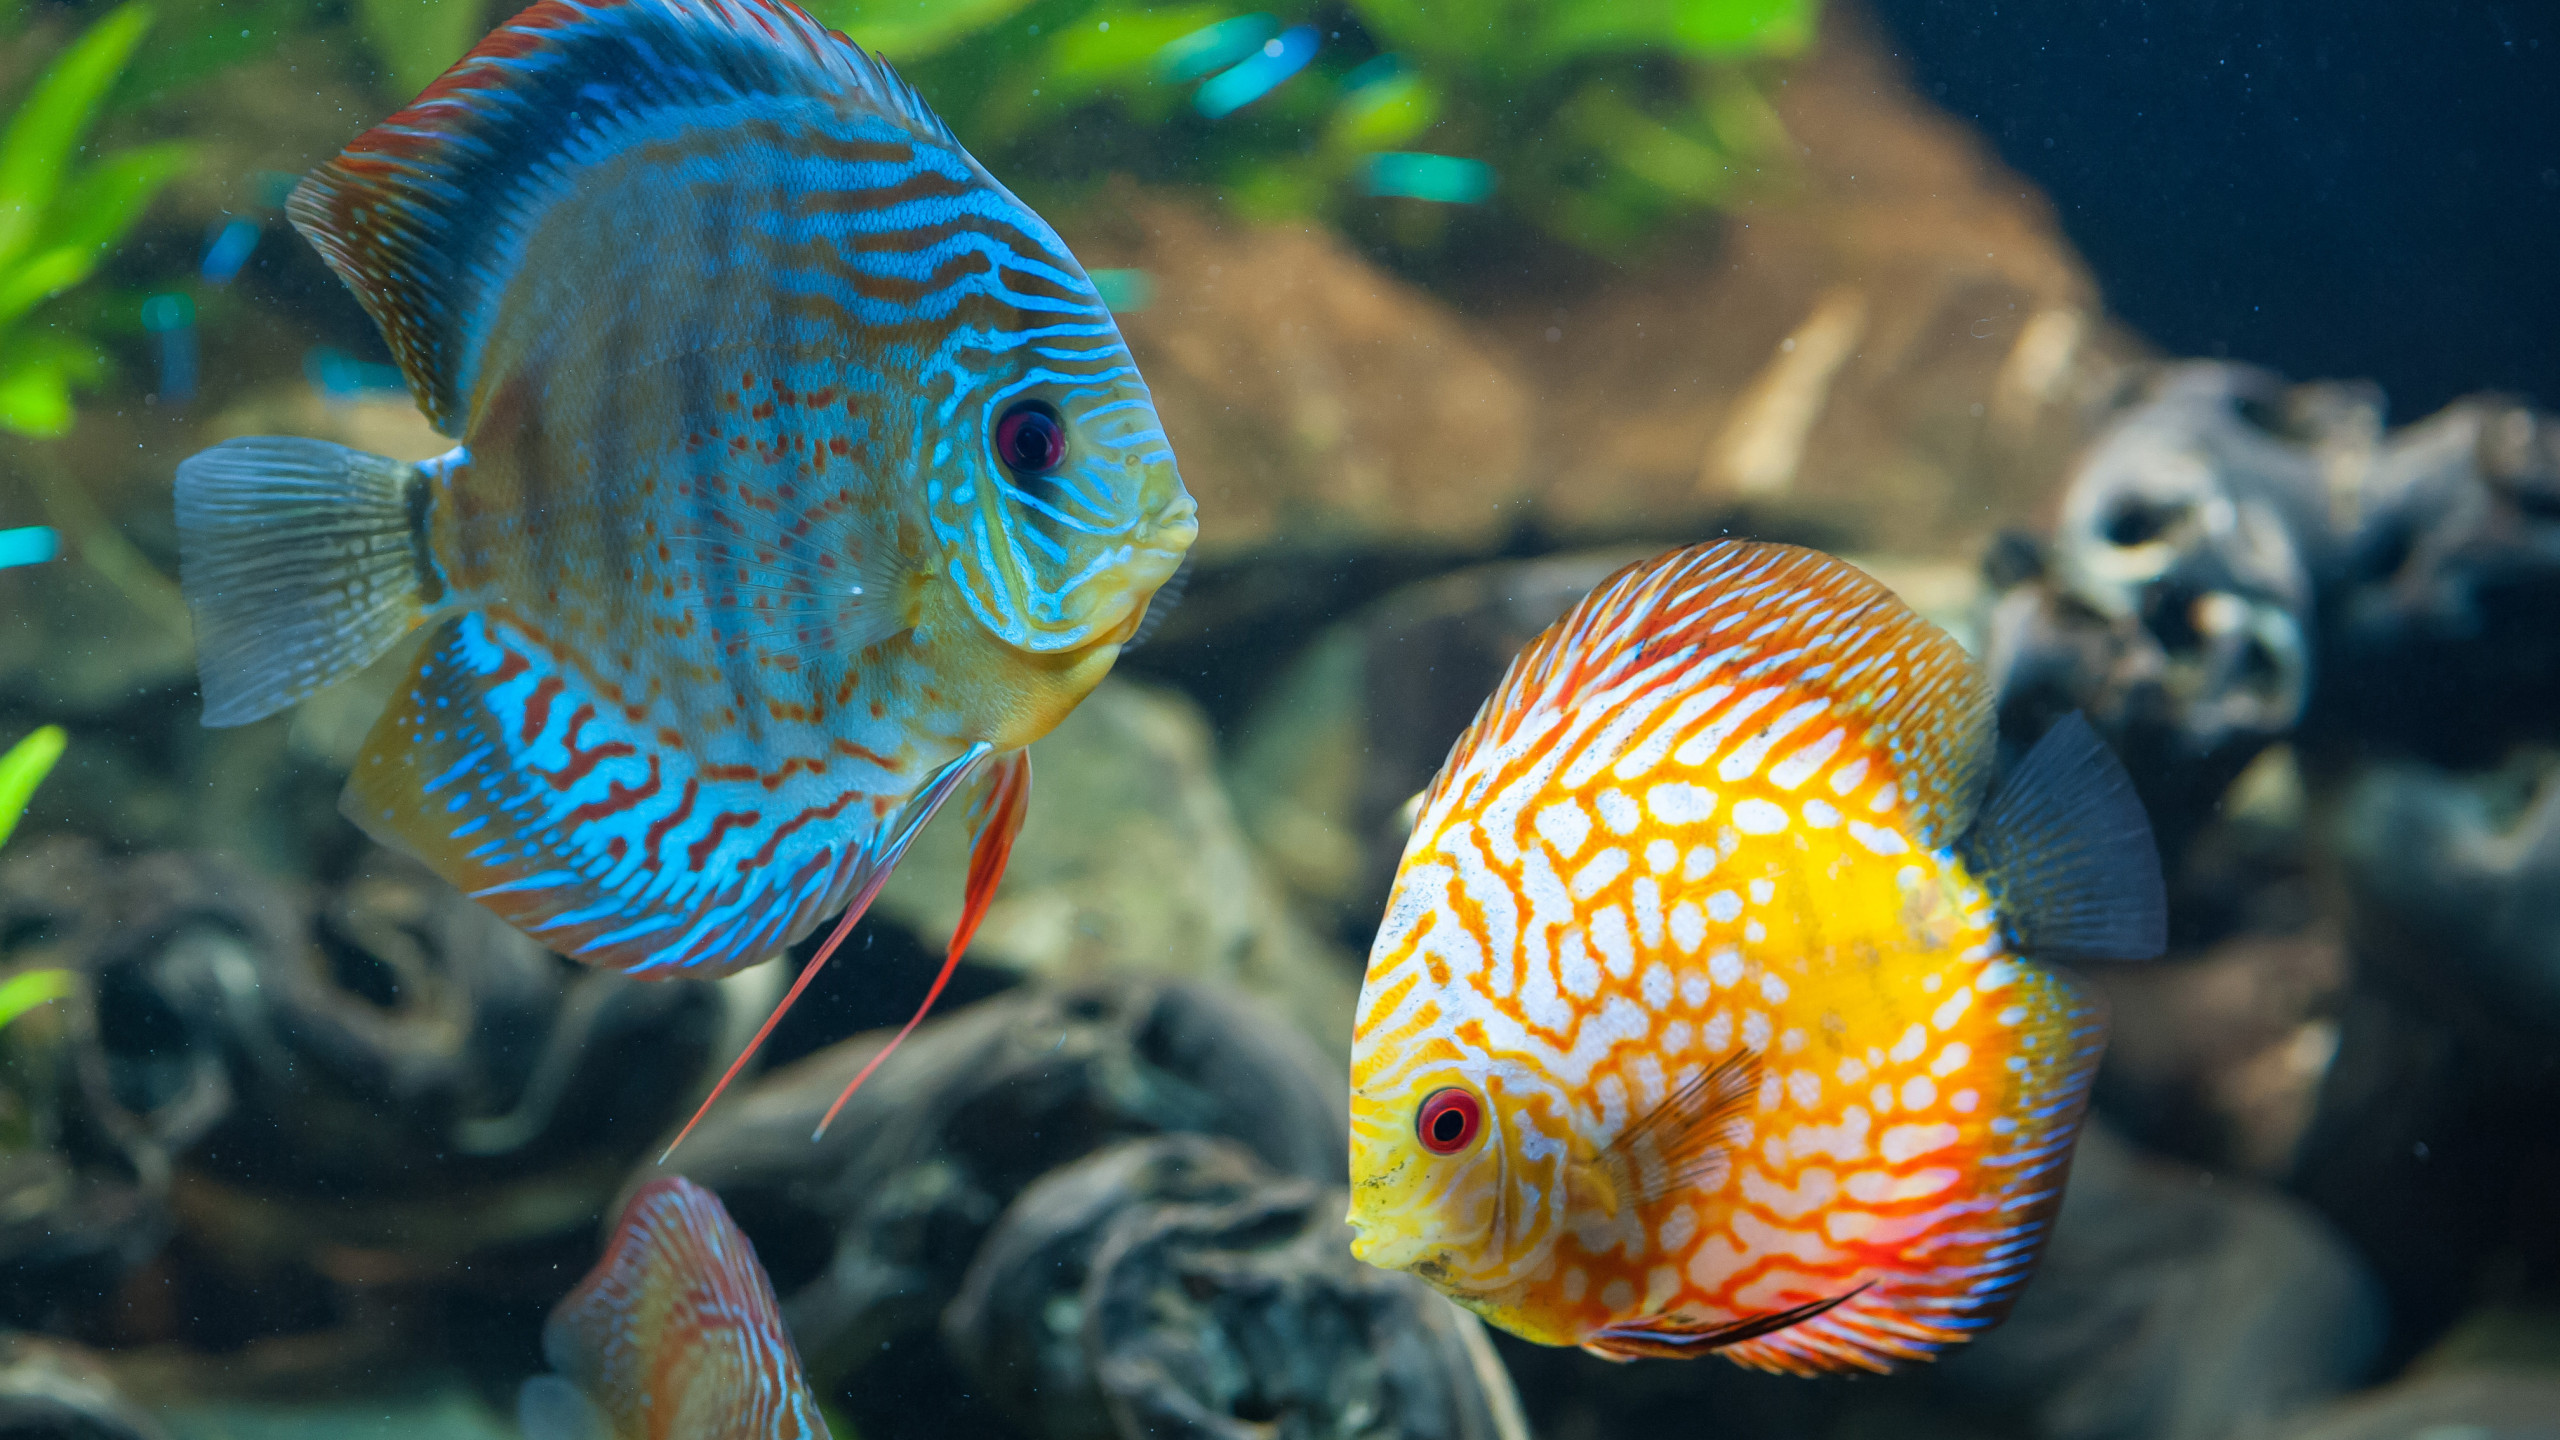 Blue Betta Fish Images Browse 51059 Stock Photos  Vectors Free Download  with Trial  Shutterstock